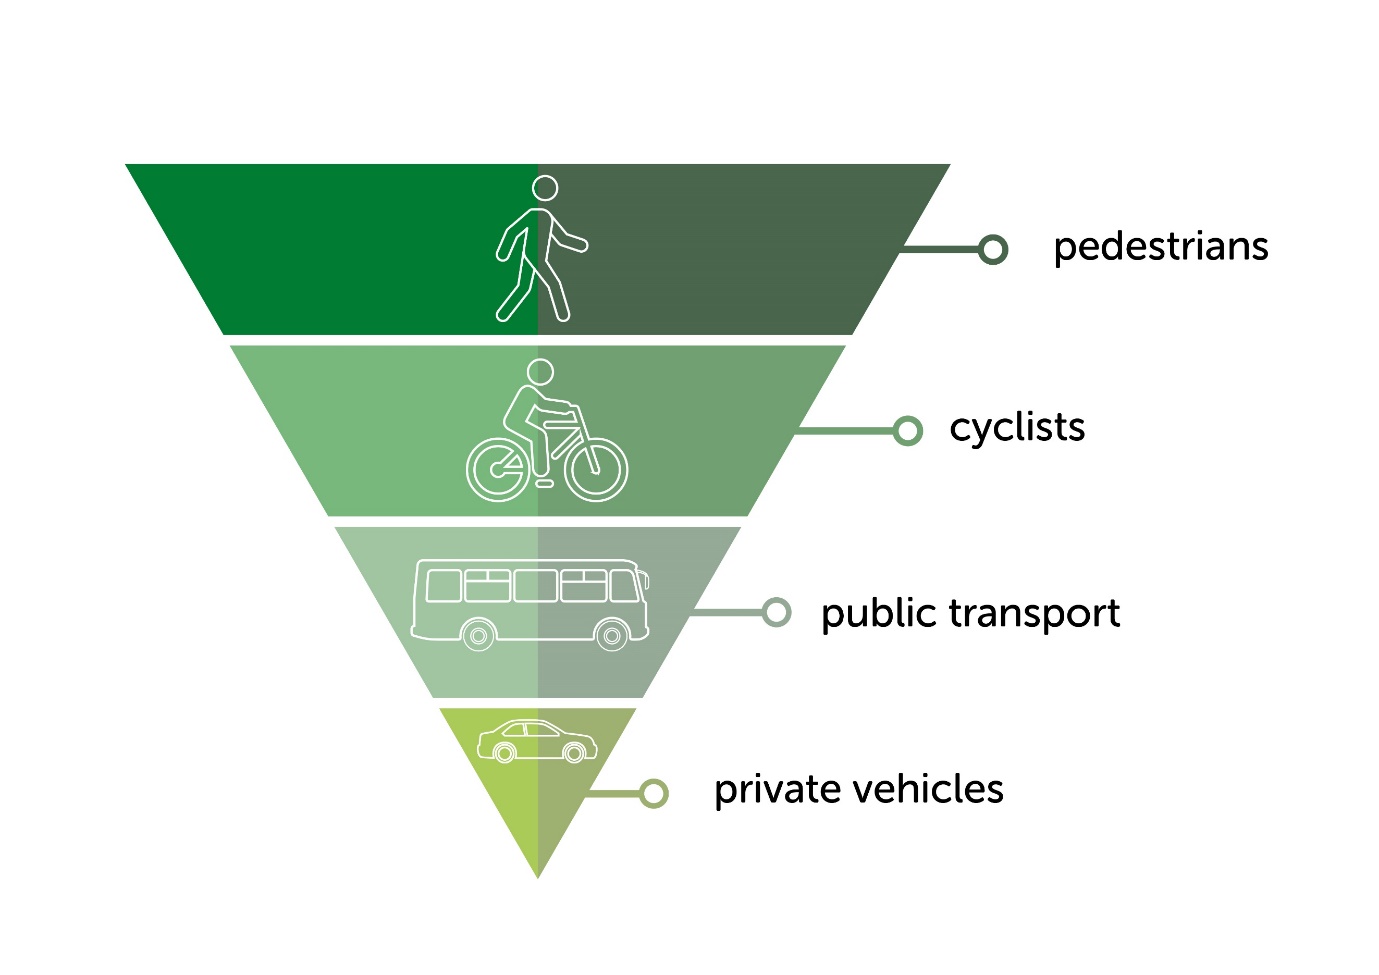 Diagram Sustainable Transport Hierarchy - Pedestrians, cyclists, public transport, private vehicles